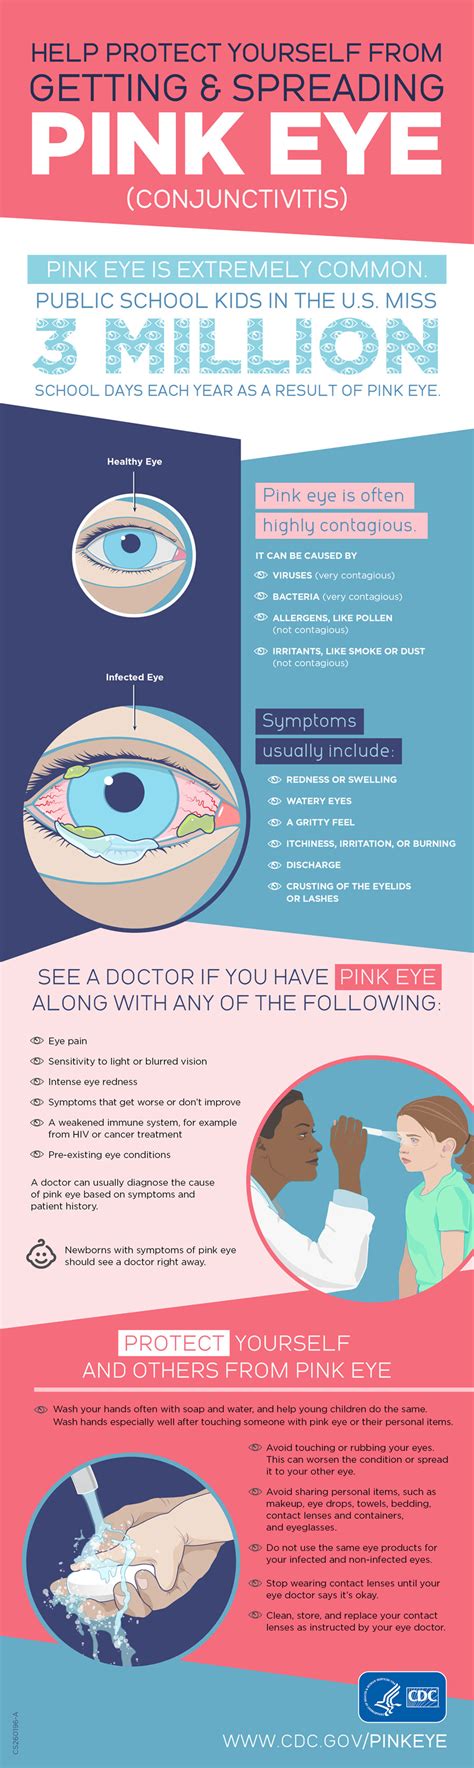 Conjunctivitis Help Protect Yourself From Getting And Spreading Pink